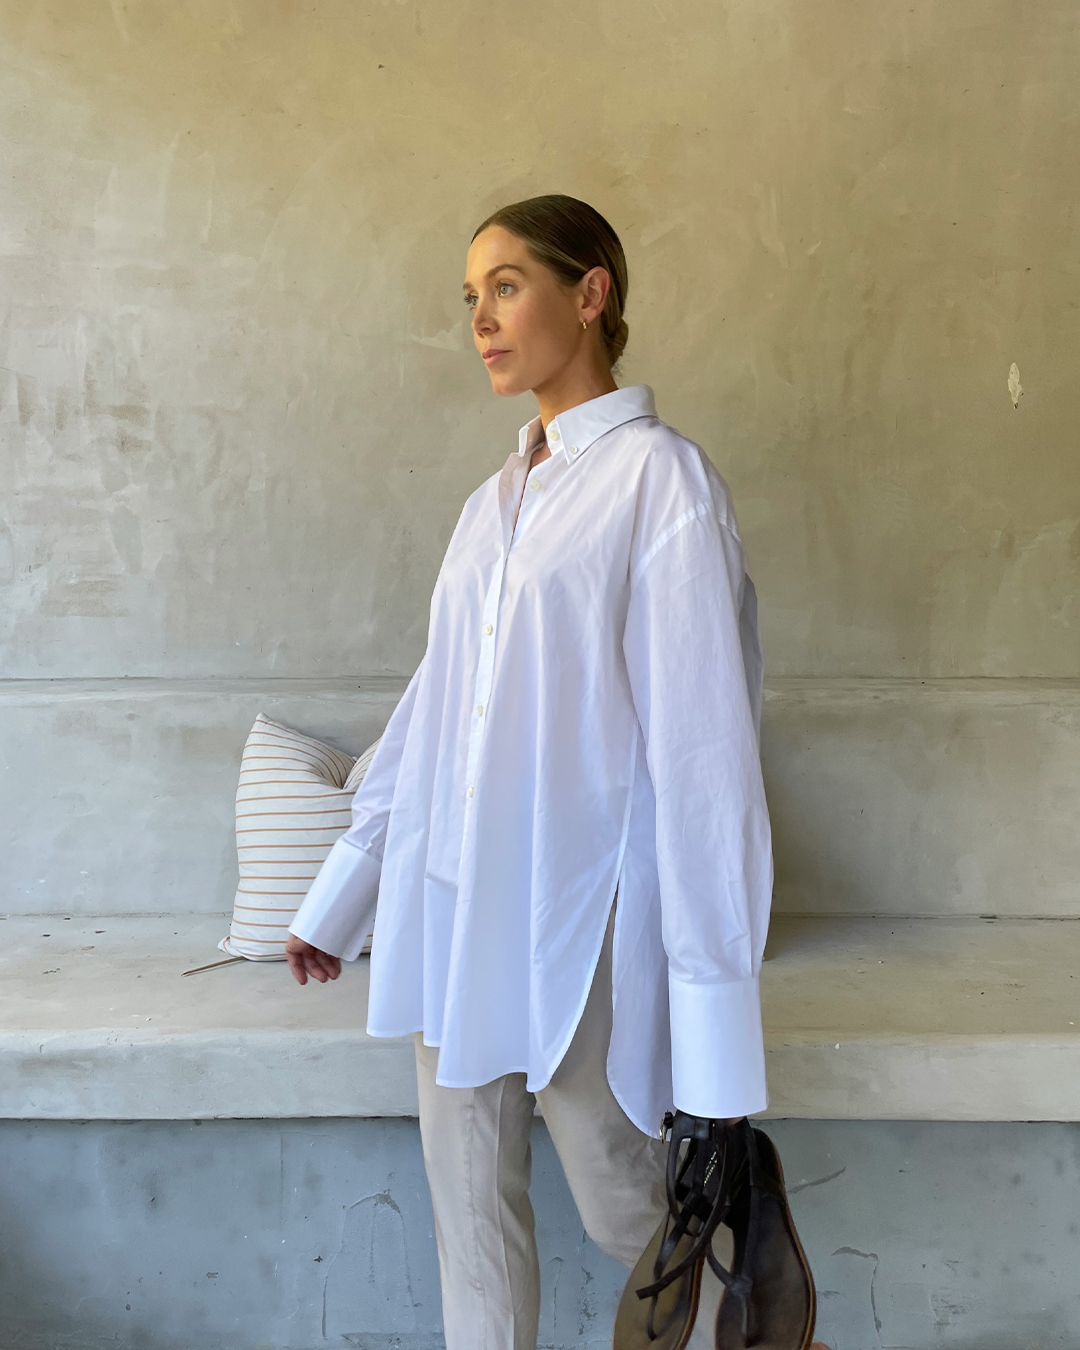 Hayley Bonham in white crisp shirting with a sleek bun hair style and tailored workwear trousers